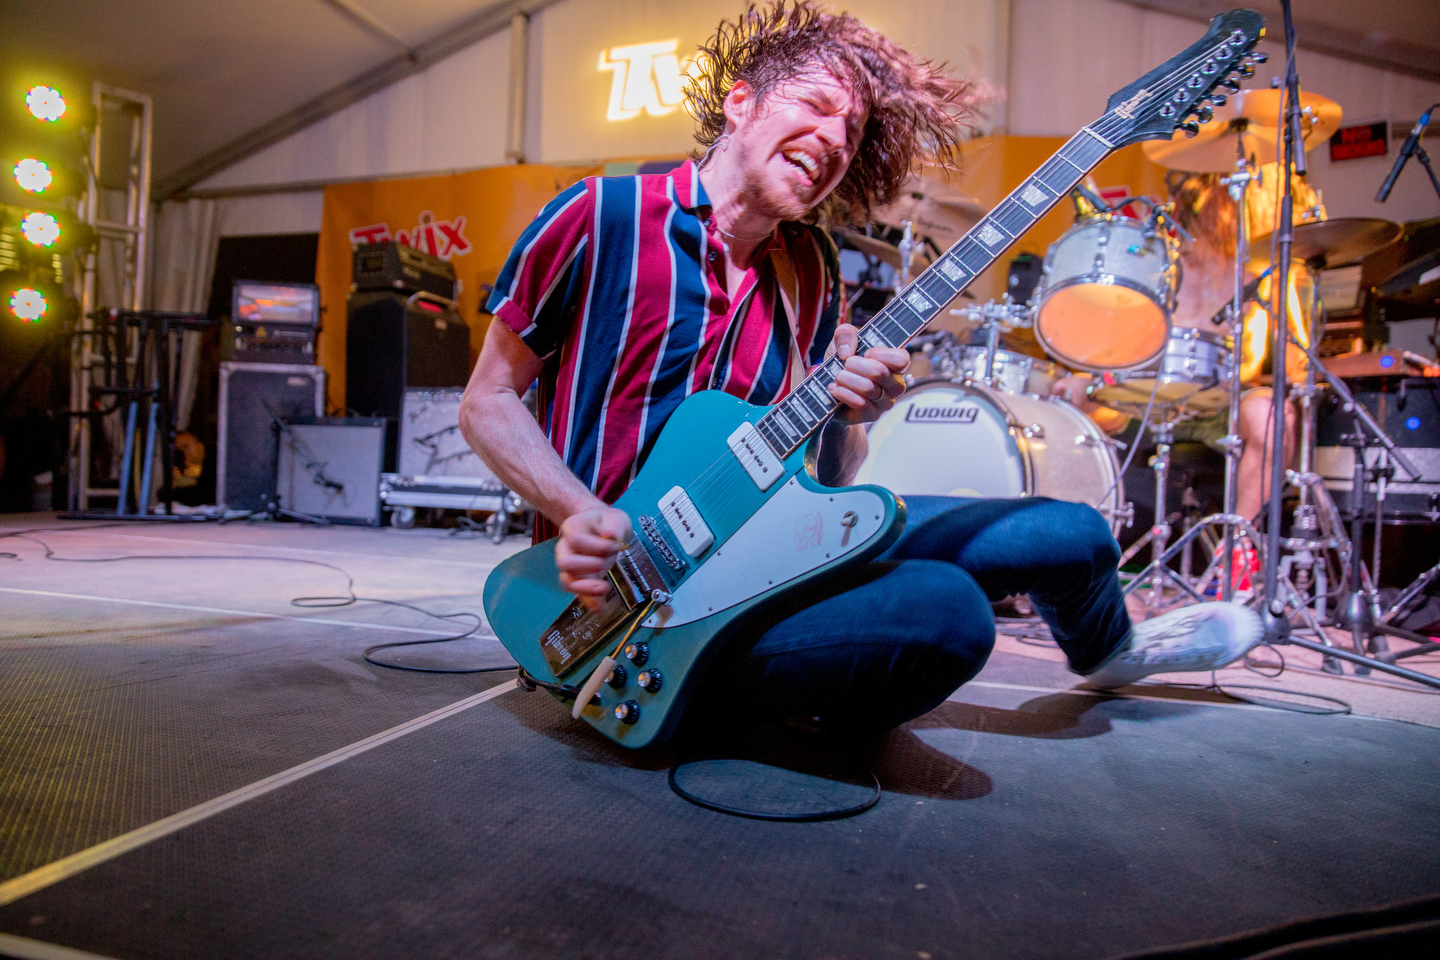 Black Pistol Fire, presented by TWIX House of Duos. Photo by Cris DeWitt